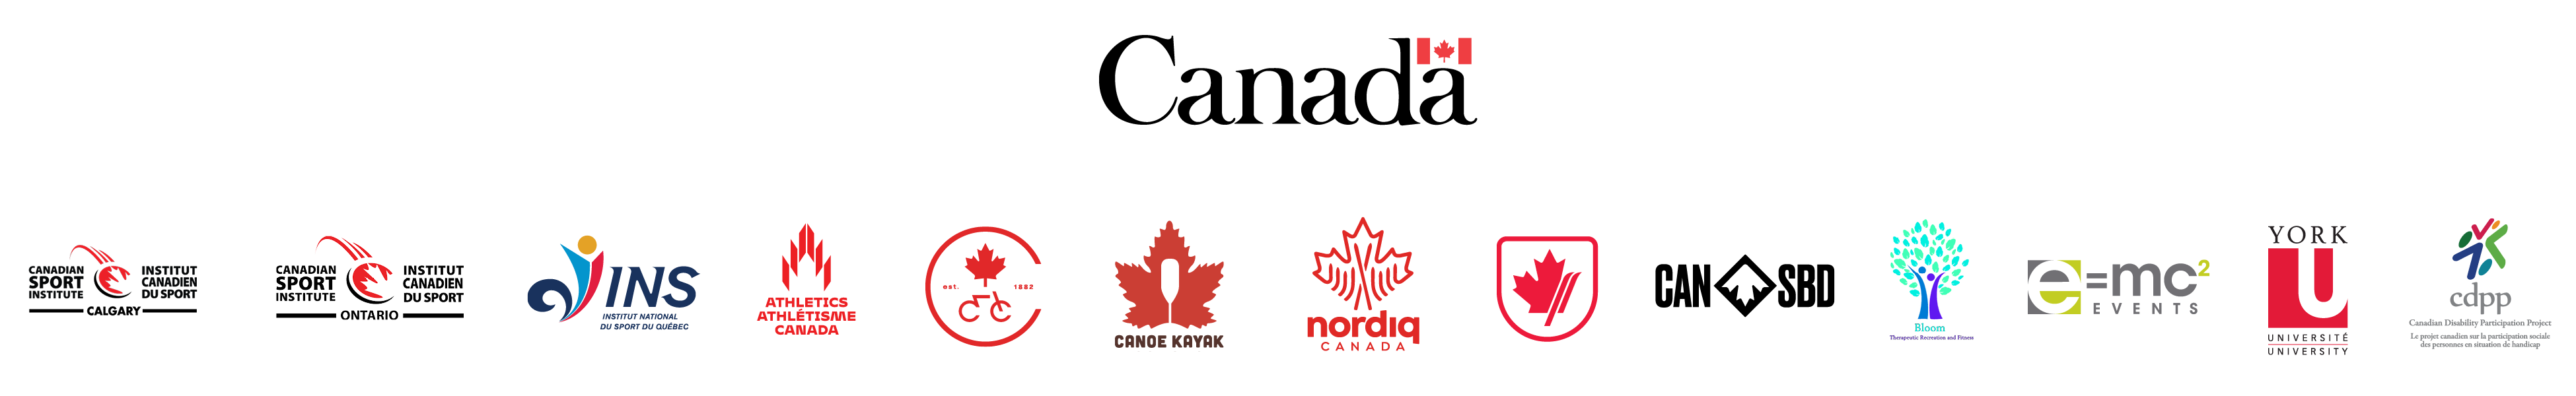 Government of Canada logo on top (CANADA with flag over the A), followed by Canadian Sport Institute Calgary and Ontario, INS, Athletics Canada, Cycling Canada, Canoe Kayak Canada, Nordiq Canada, Alpine Canada, Snowboard Canada, Bloom, EC2 Events, York University and CDPP